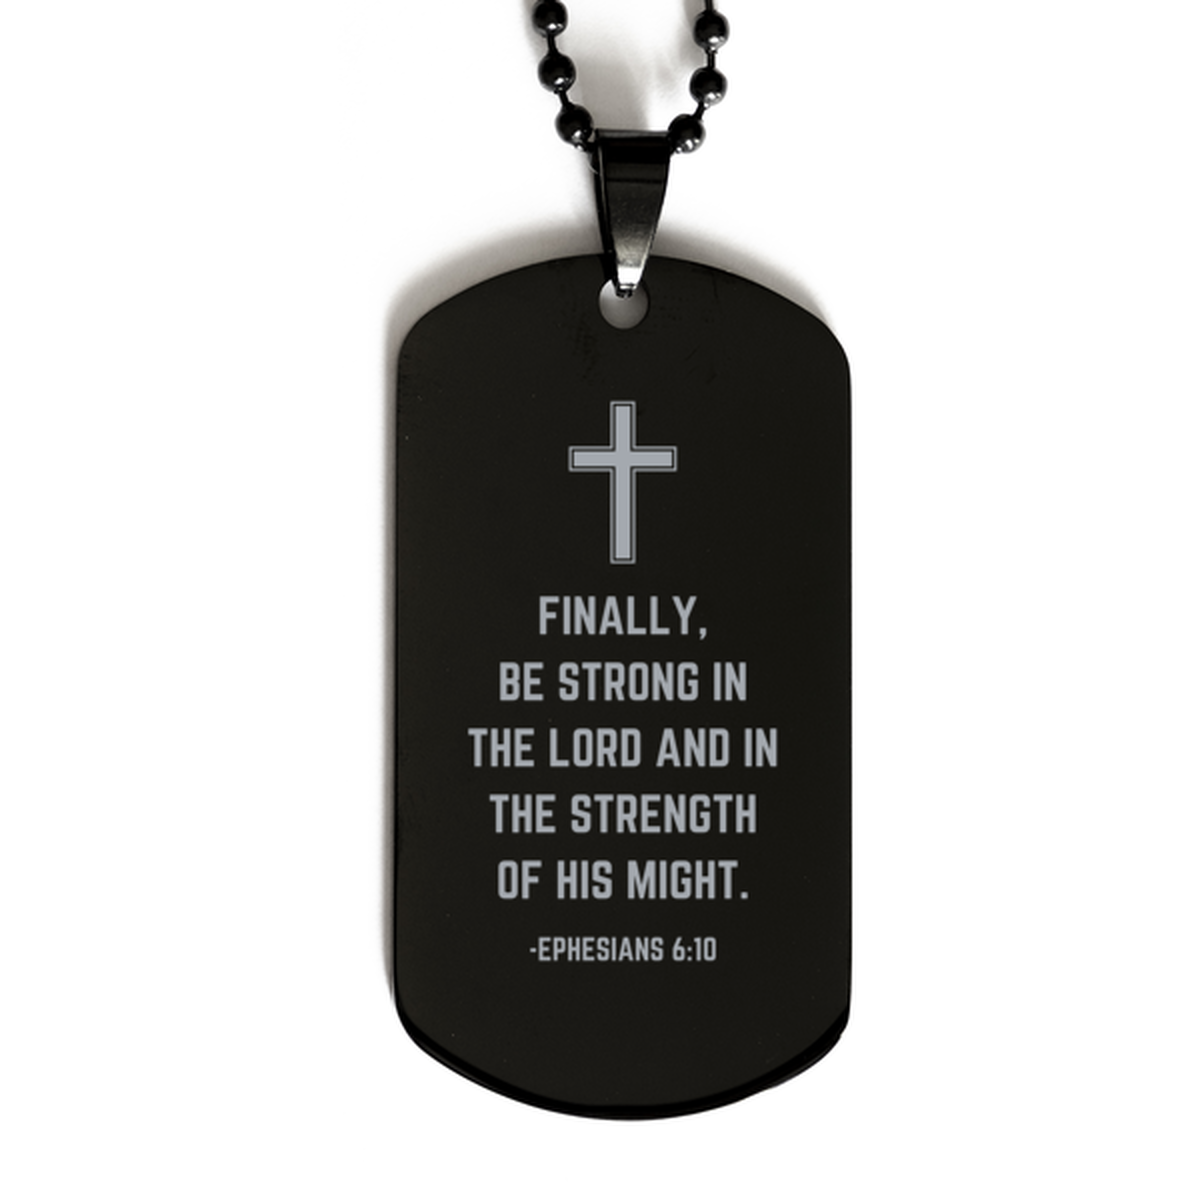 Baptism Gifts For Teenage Boys Girls, Christian Bible Verse Black Dog Tag, Finally, be strong in the Lord Confirmation Gifts, Bible Verse Necklace for Son, Godson, Grandson, Nephew